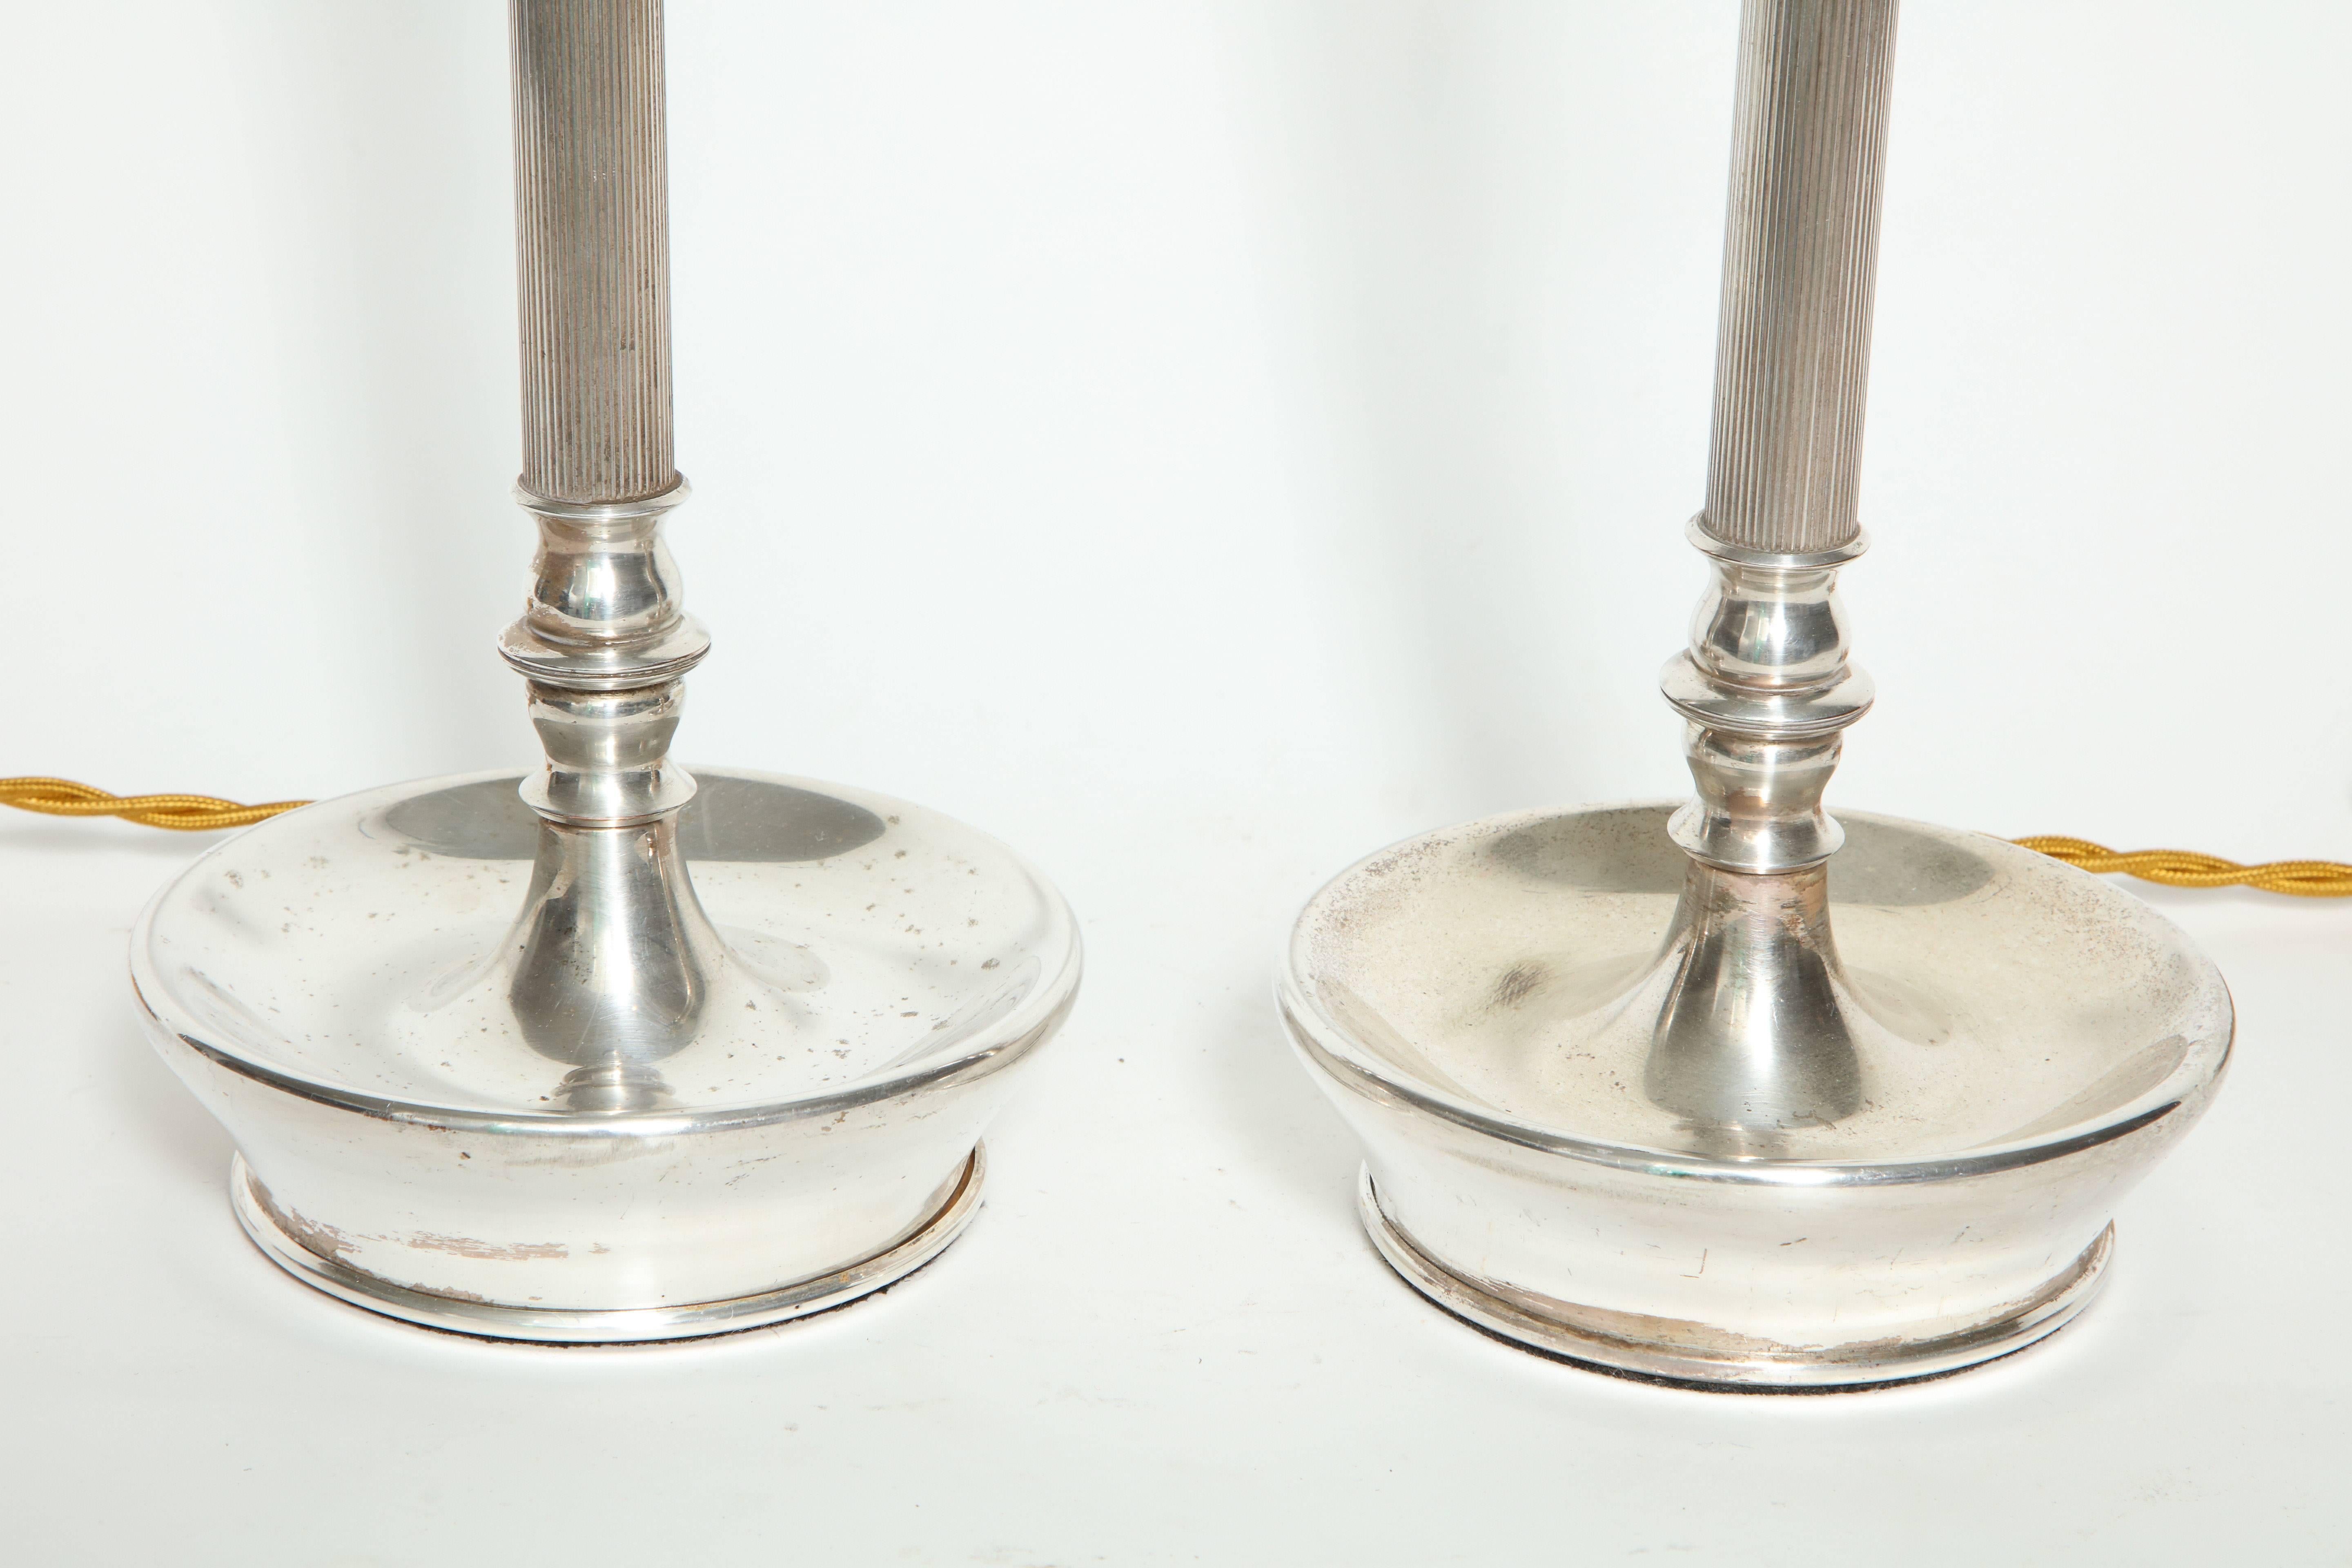 Pair of silver plated table lamps with original pull sockets.